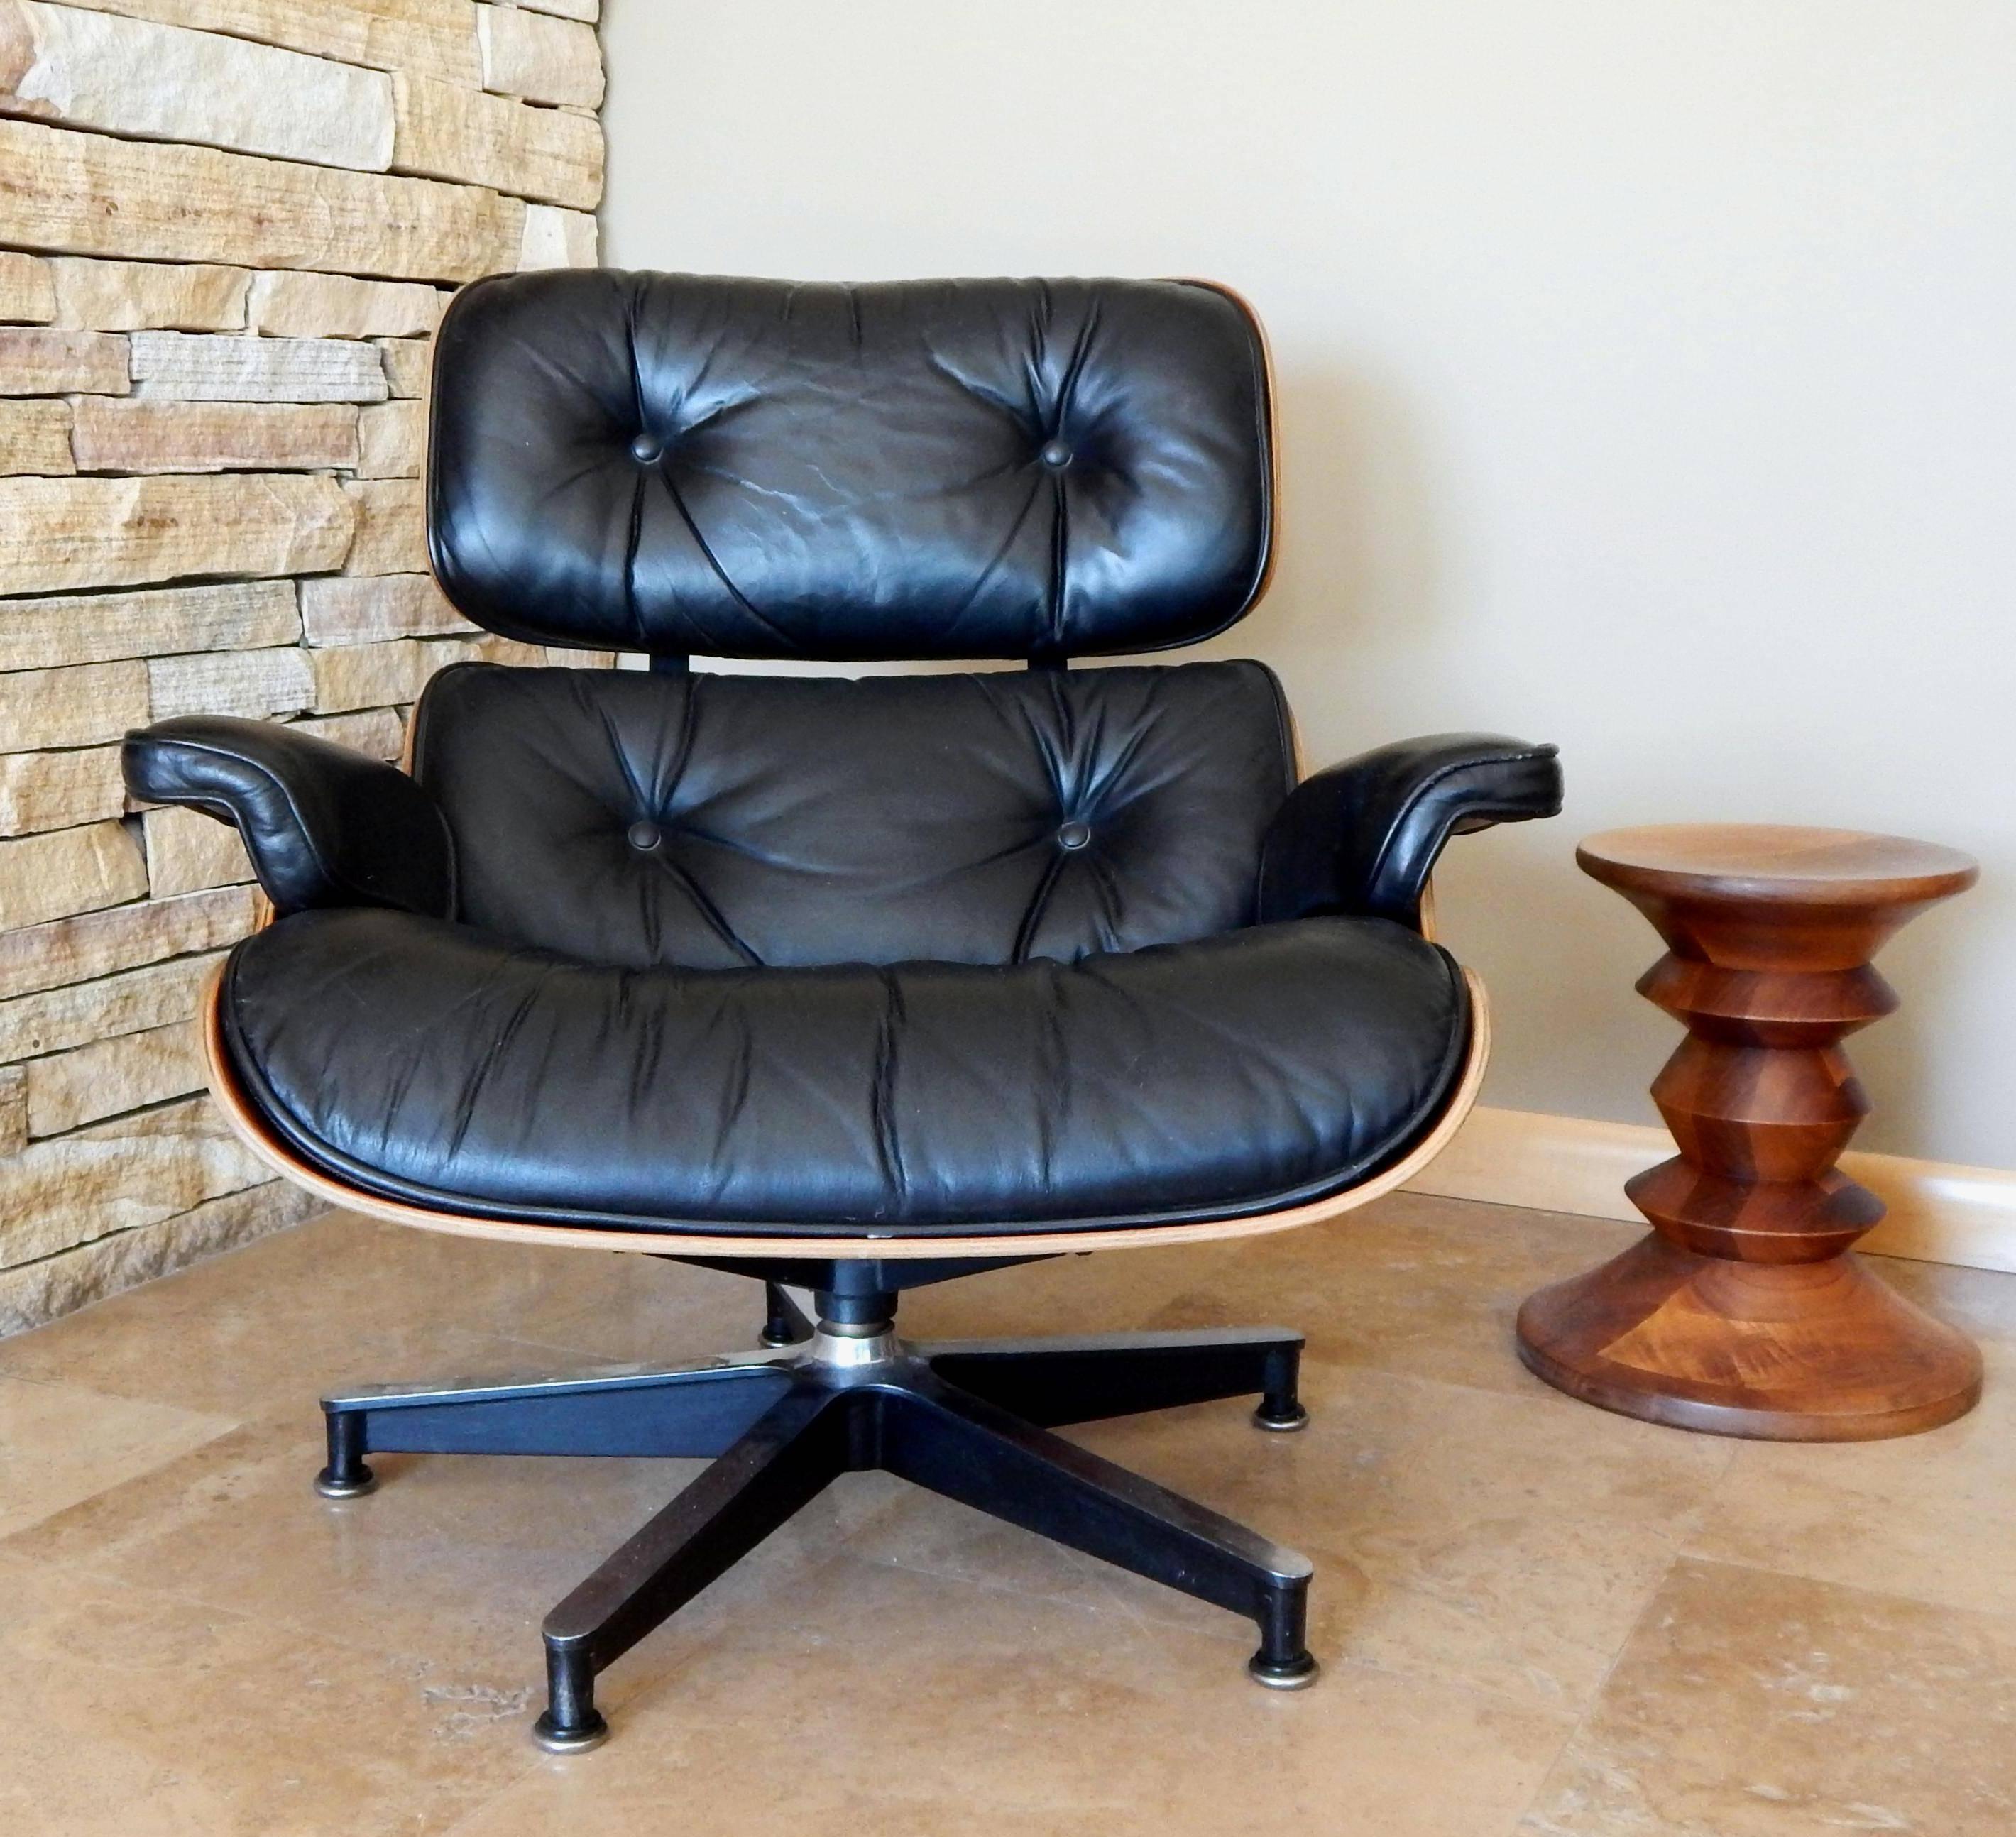 Eames Herman Miller lounge and ottoman in rosewood and leather.
The wood and leather have wear consistent with age
and are both in excellent original condition.
Due to the new CITES regulations concerning exporting Rosewood, I will
not be able to